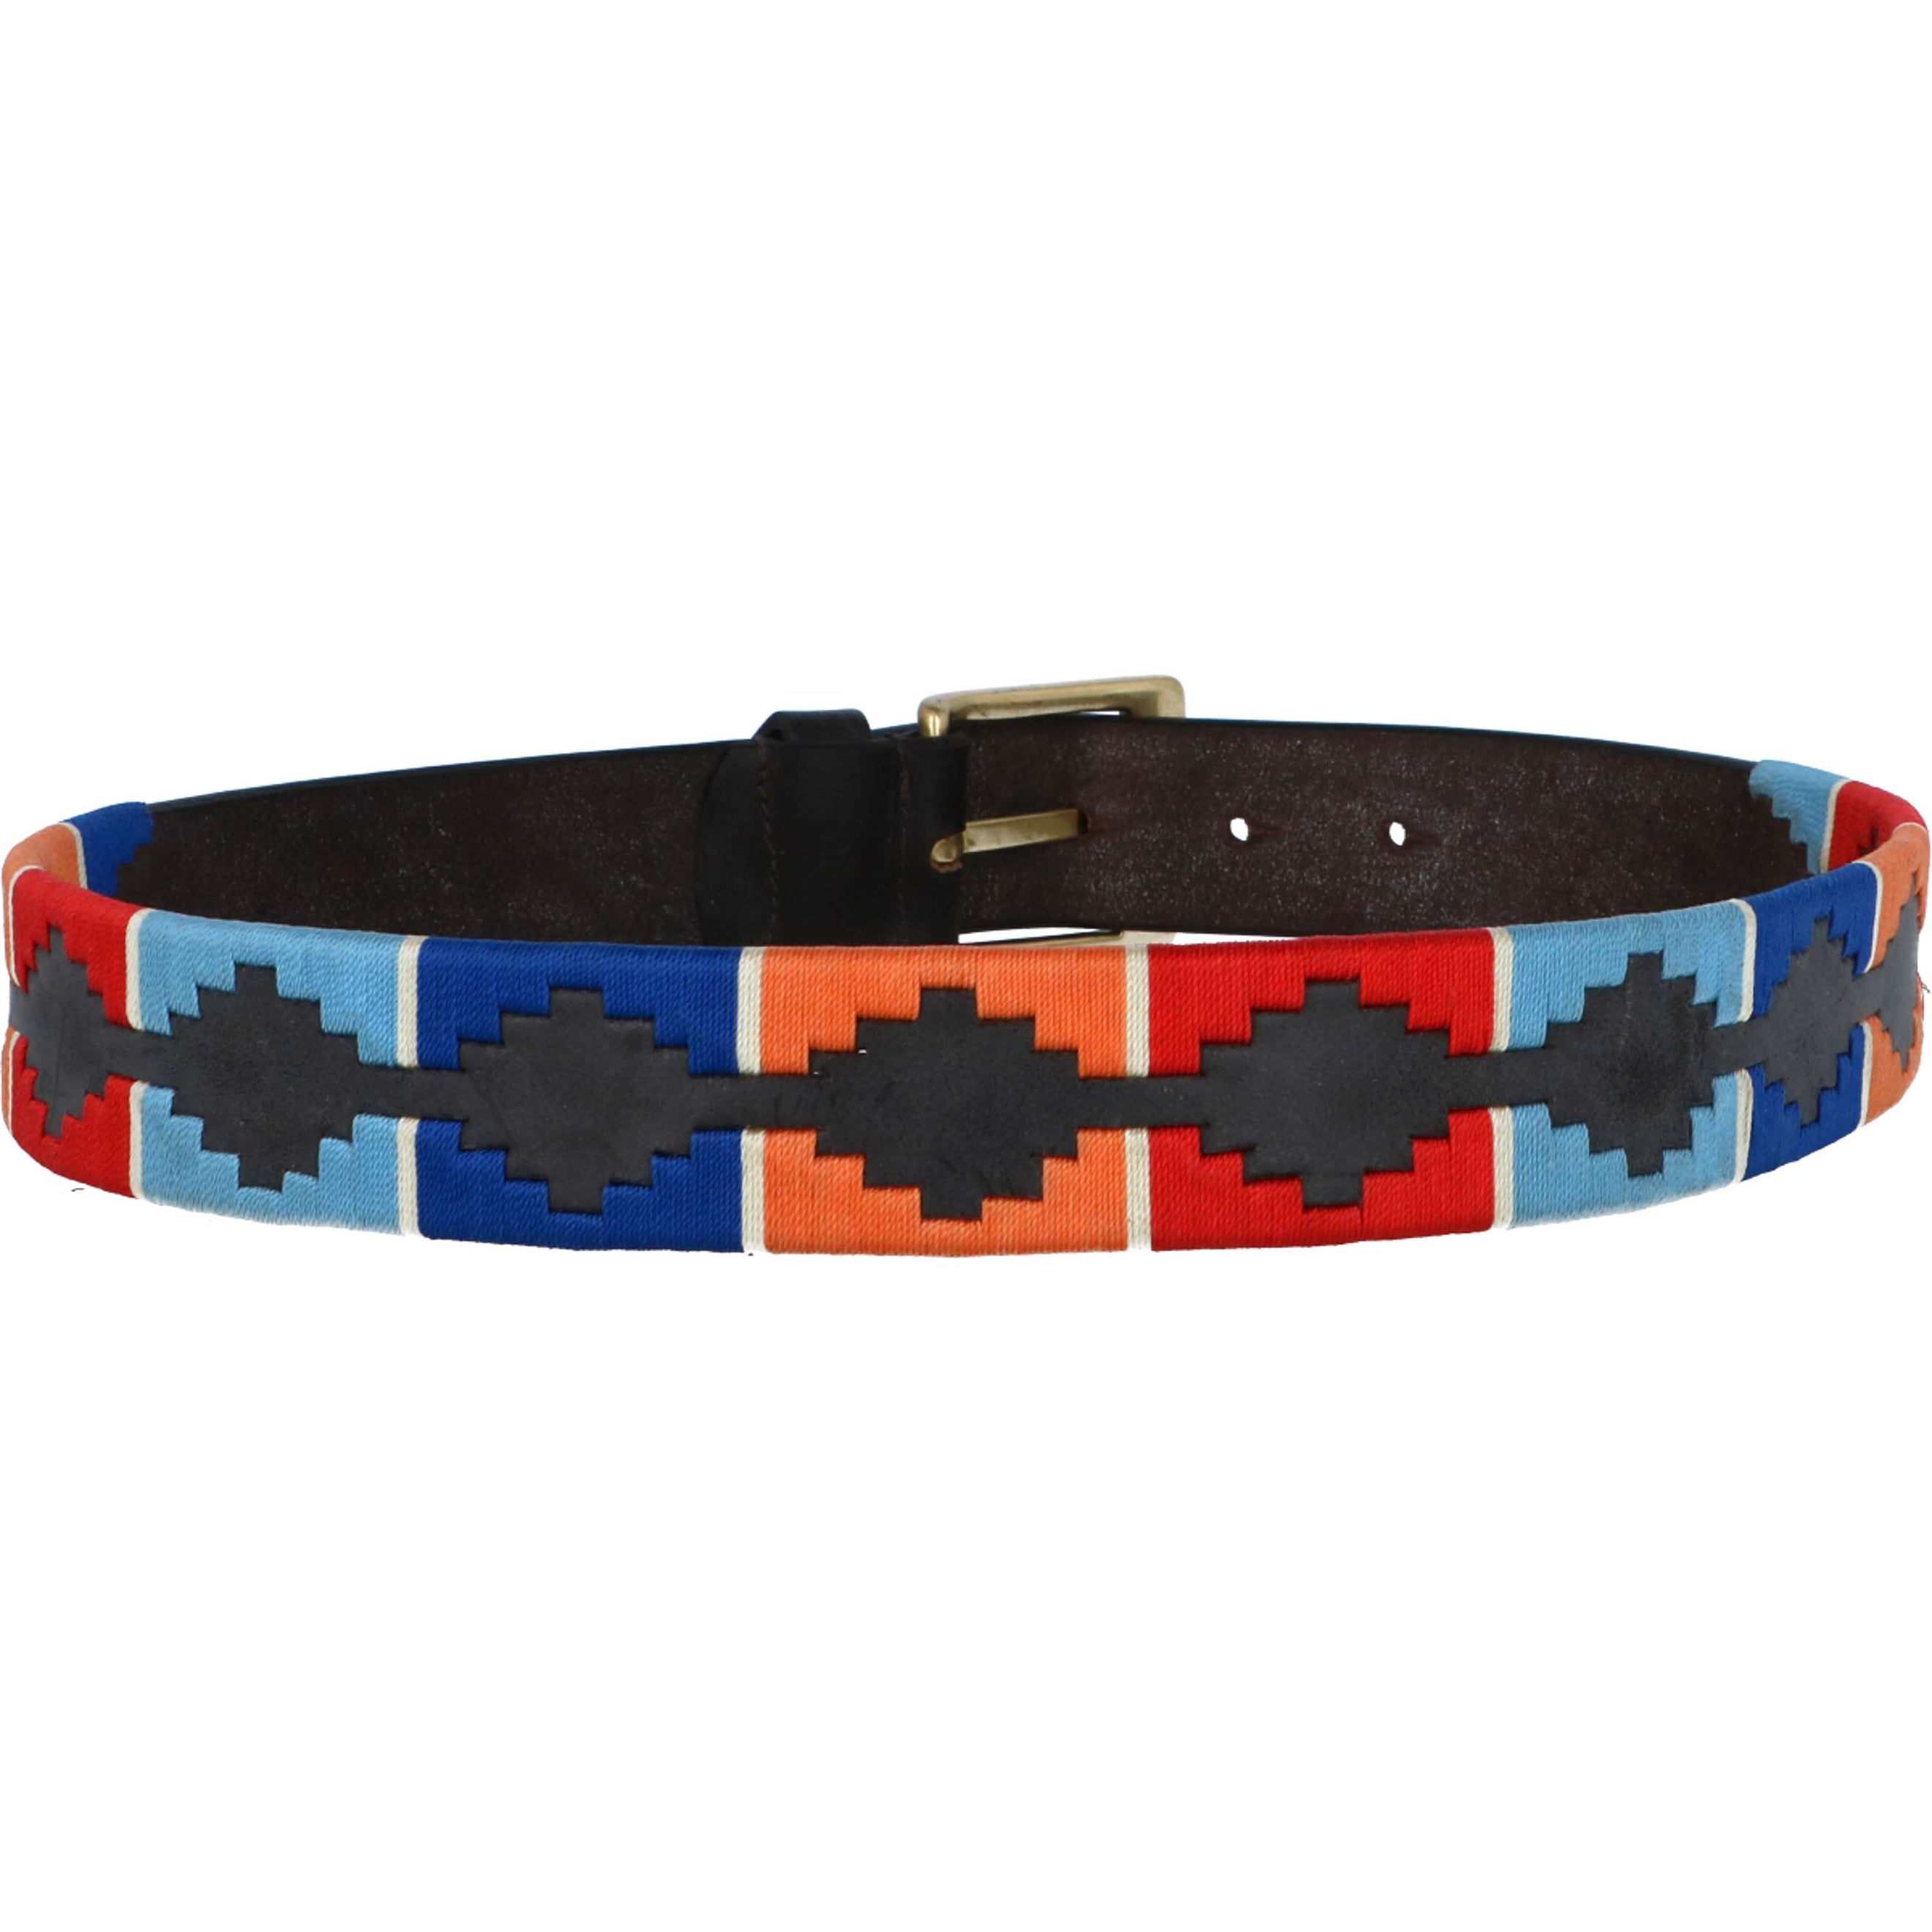 Shires Ceinture Polo Drover Turquoise/Red/Orange/Blue